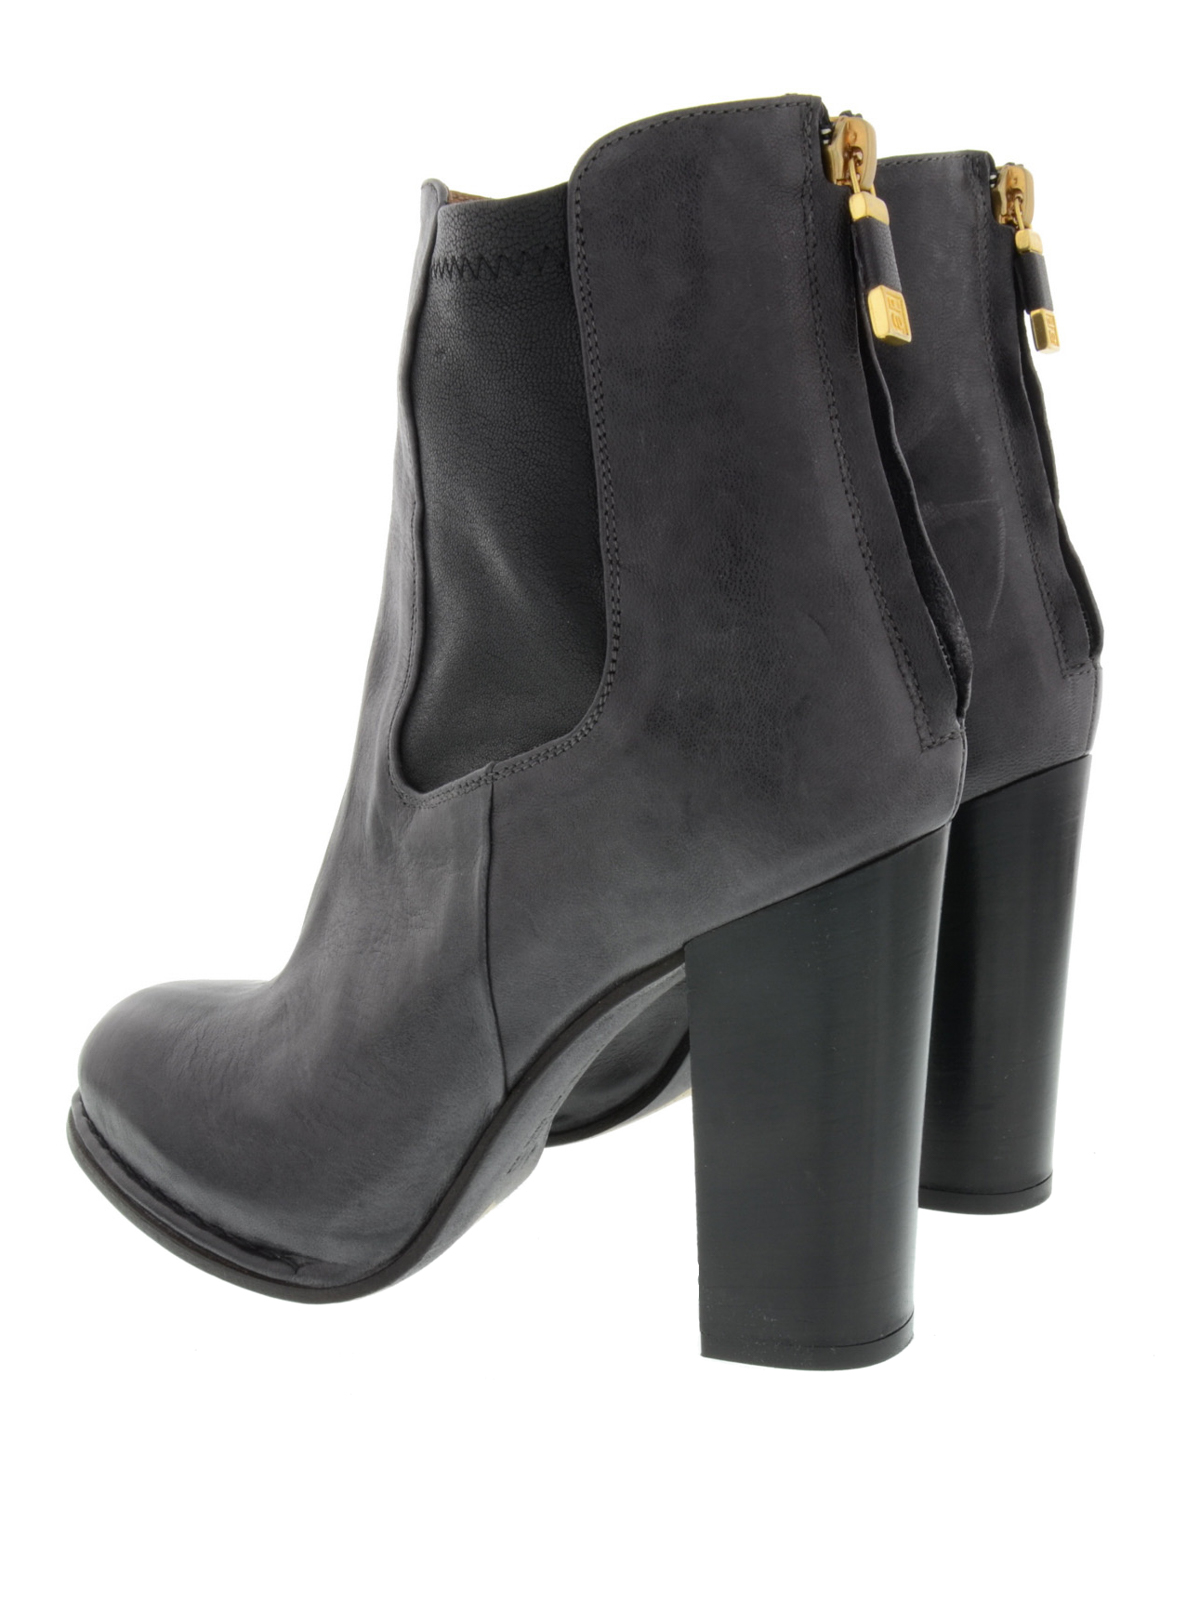 Ankle boots Alberto Fermani Rear zip leather ankle boots - REB004NERO